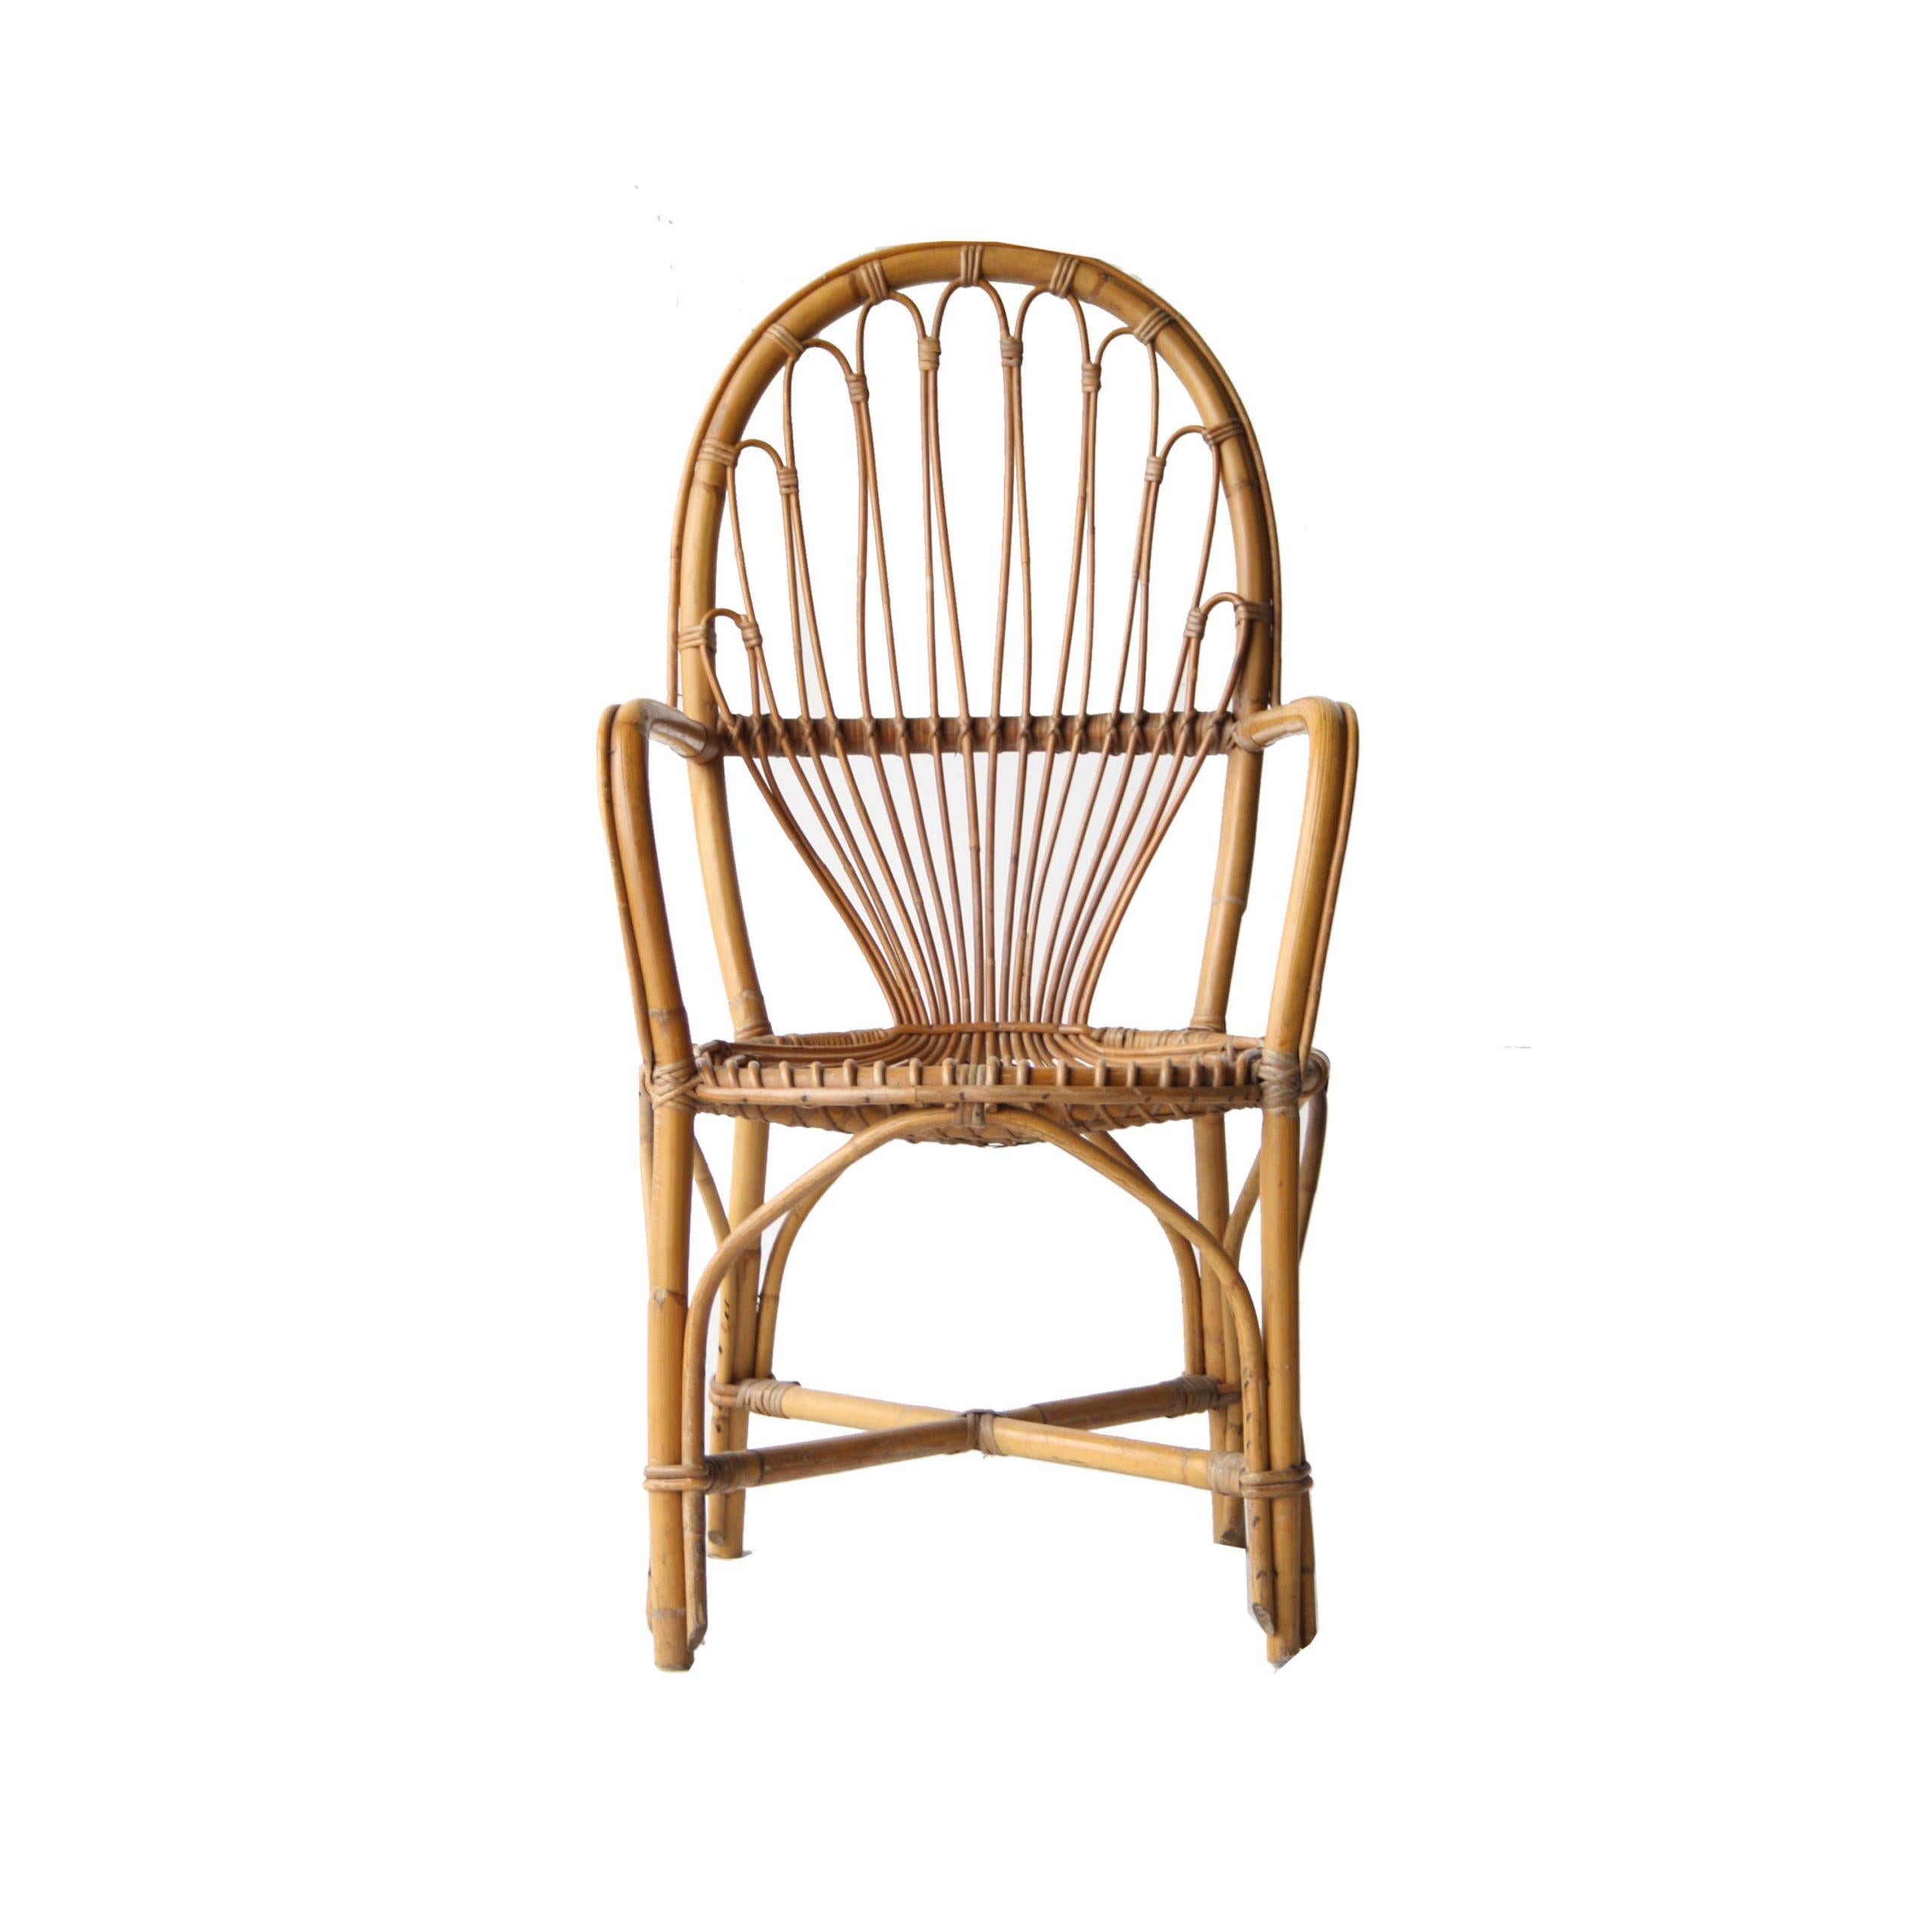 Pair of handcrafted armchairs, made of bamboo and wicker.